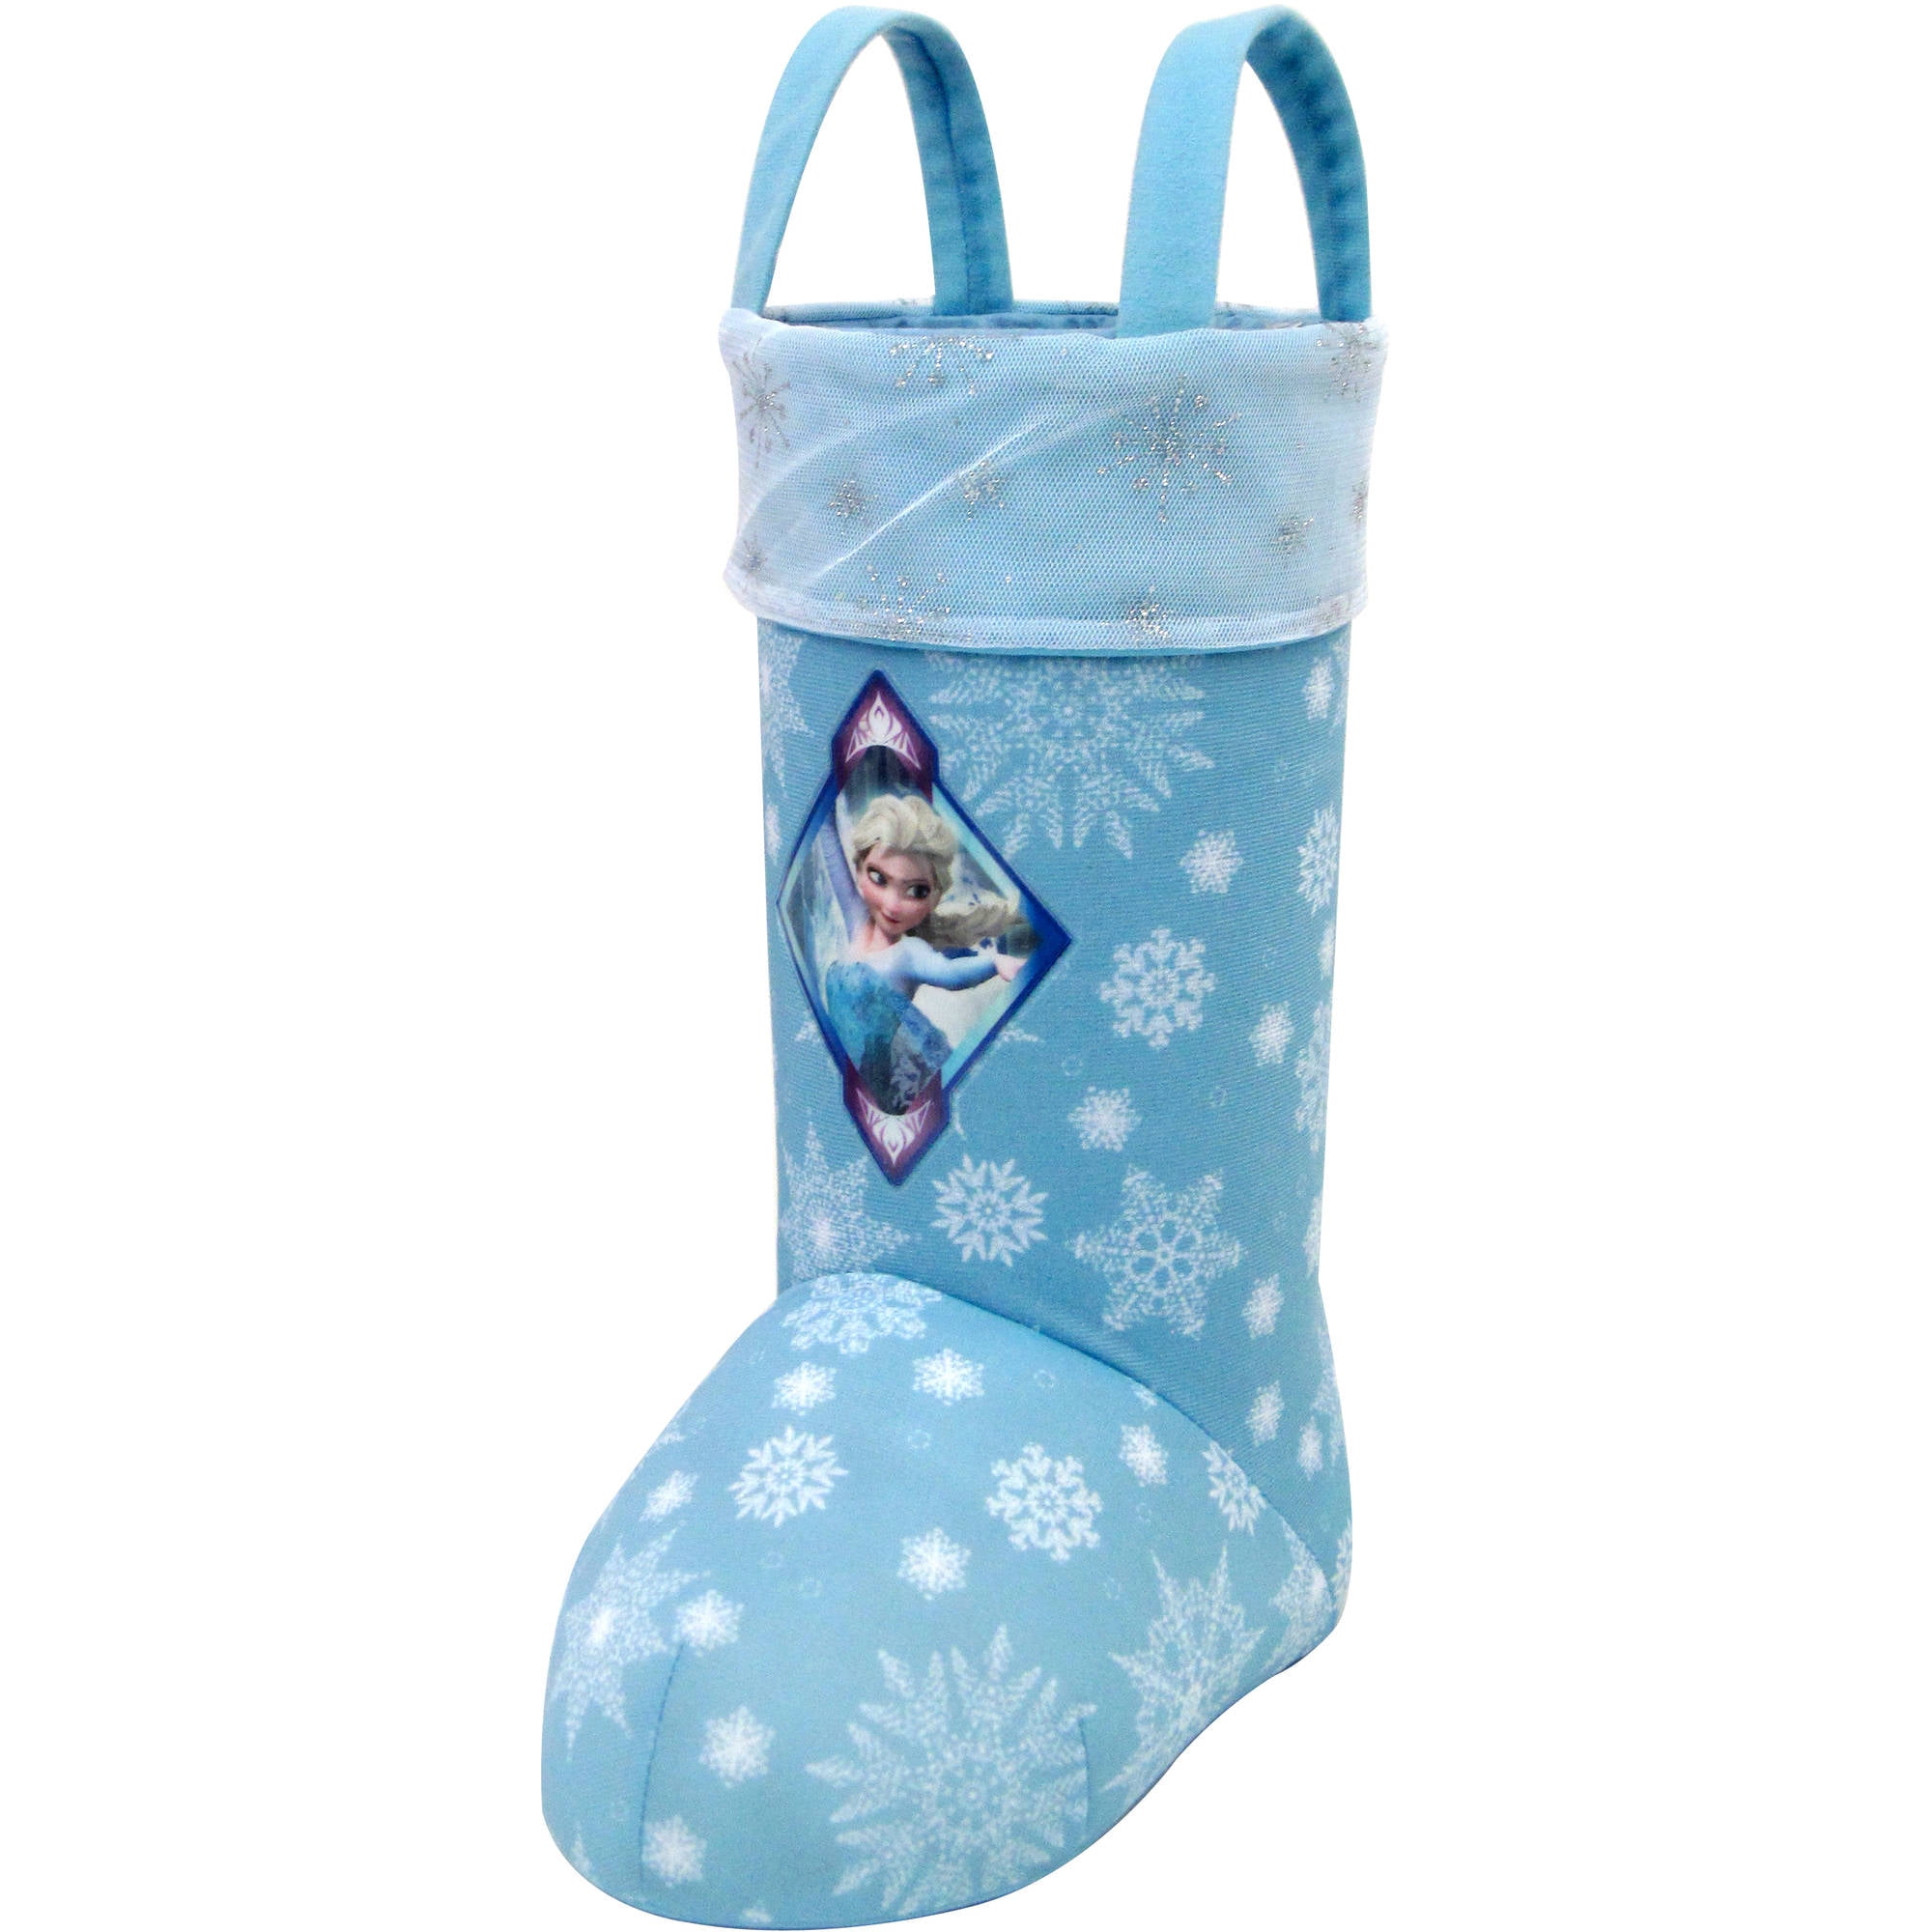 Christmas boots with Elsa fabric